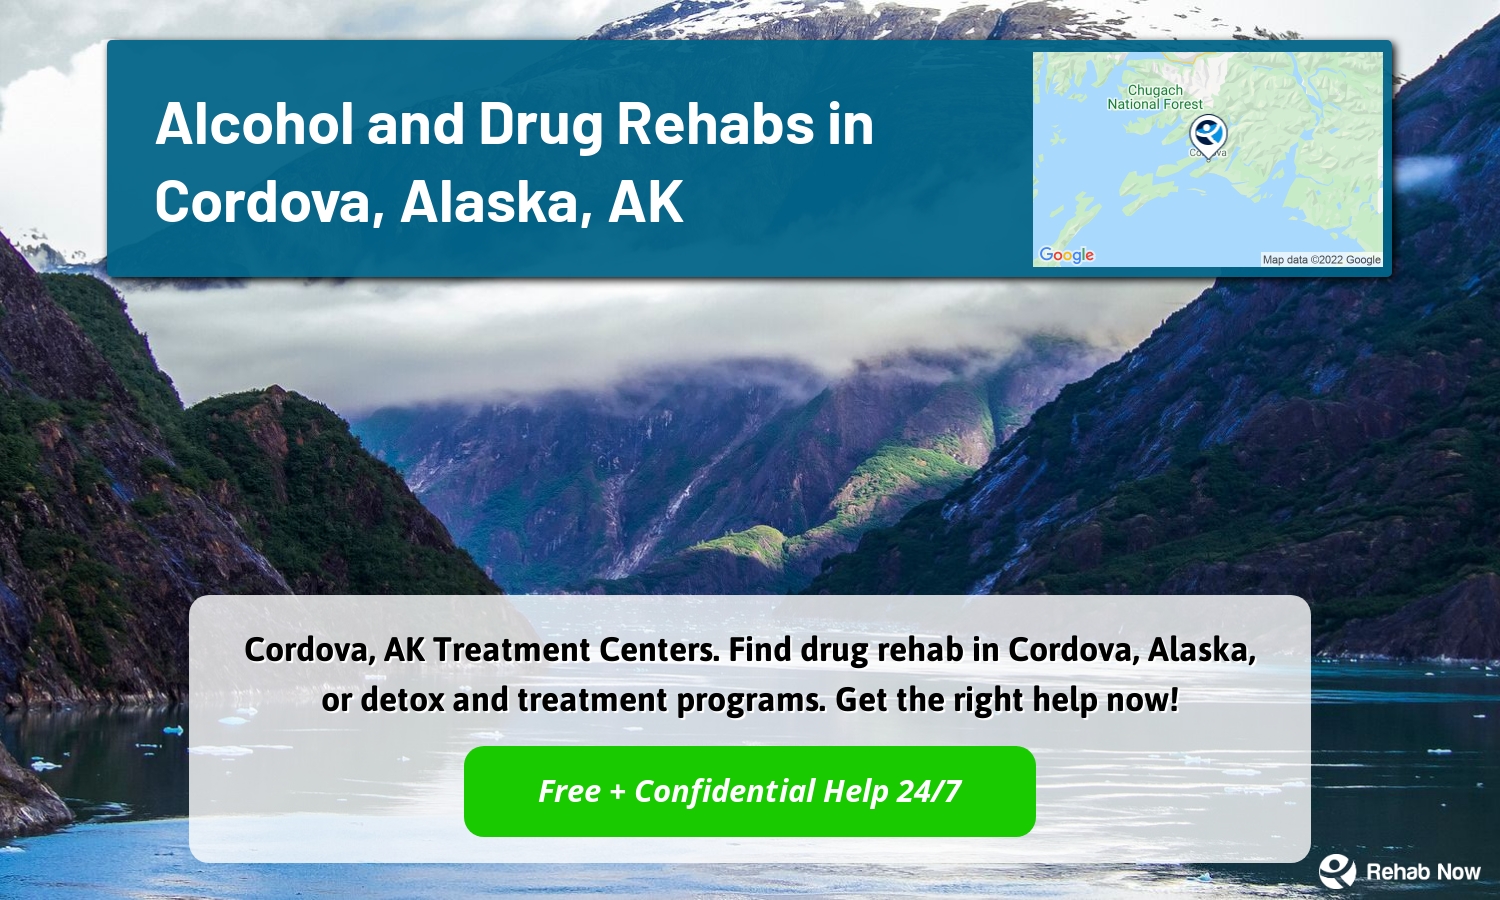 Cordova, AK Treatment Centers. Find drug rehab in Cordova, Alaska, or detox and treatment programs. Get the right help now!